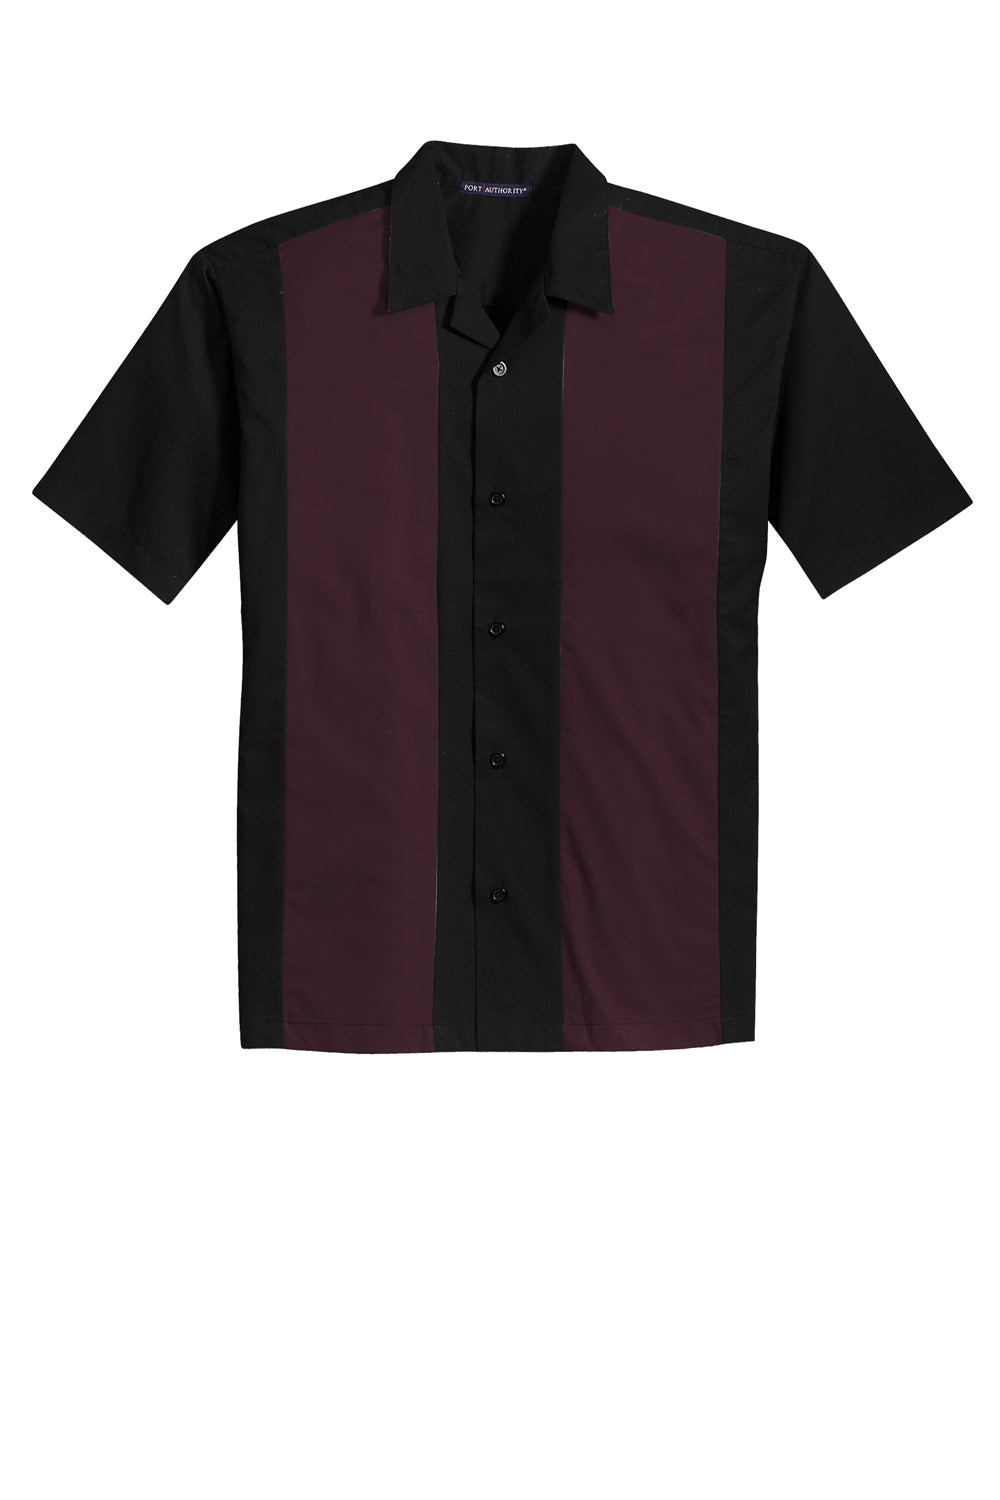 Port Authority S300 Retro Easy Care Wrinkle Resistant Short Sleeve Button Down Camp Shirt Black/Burgundy Flat Front